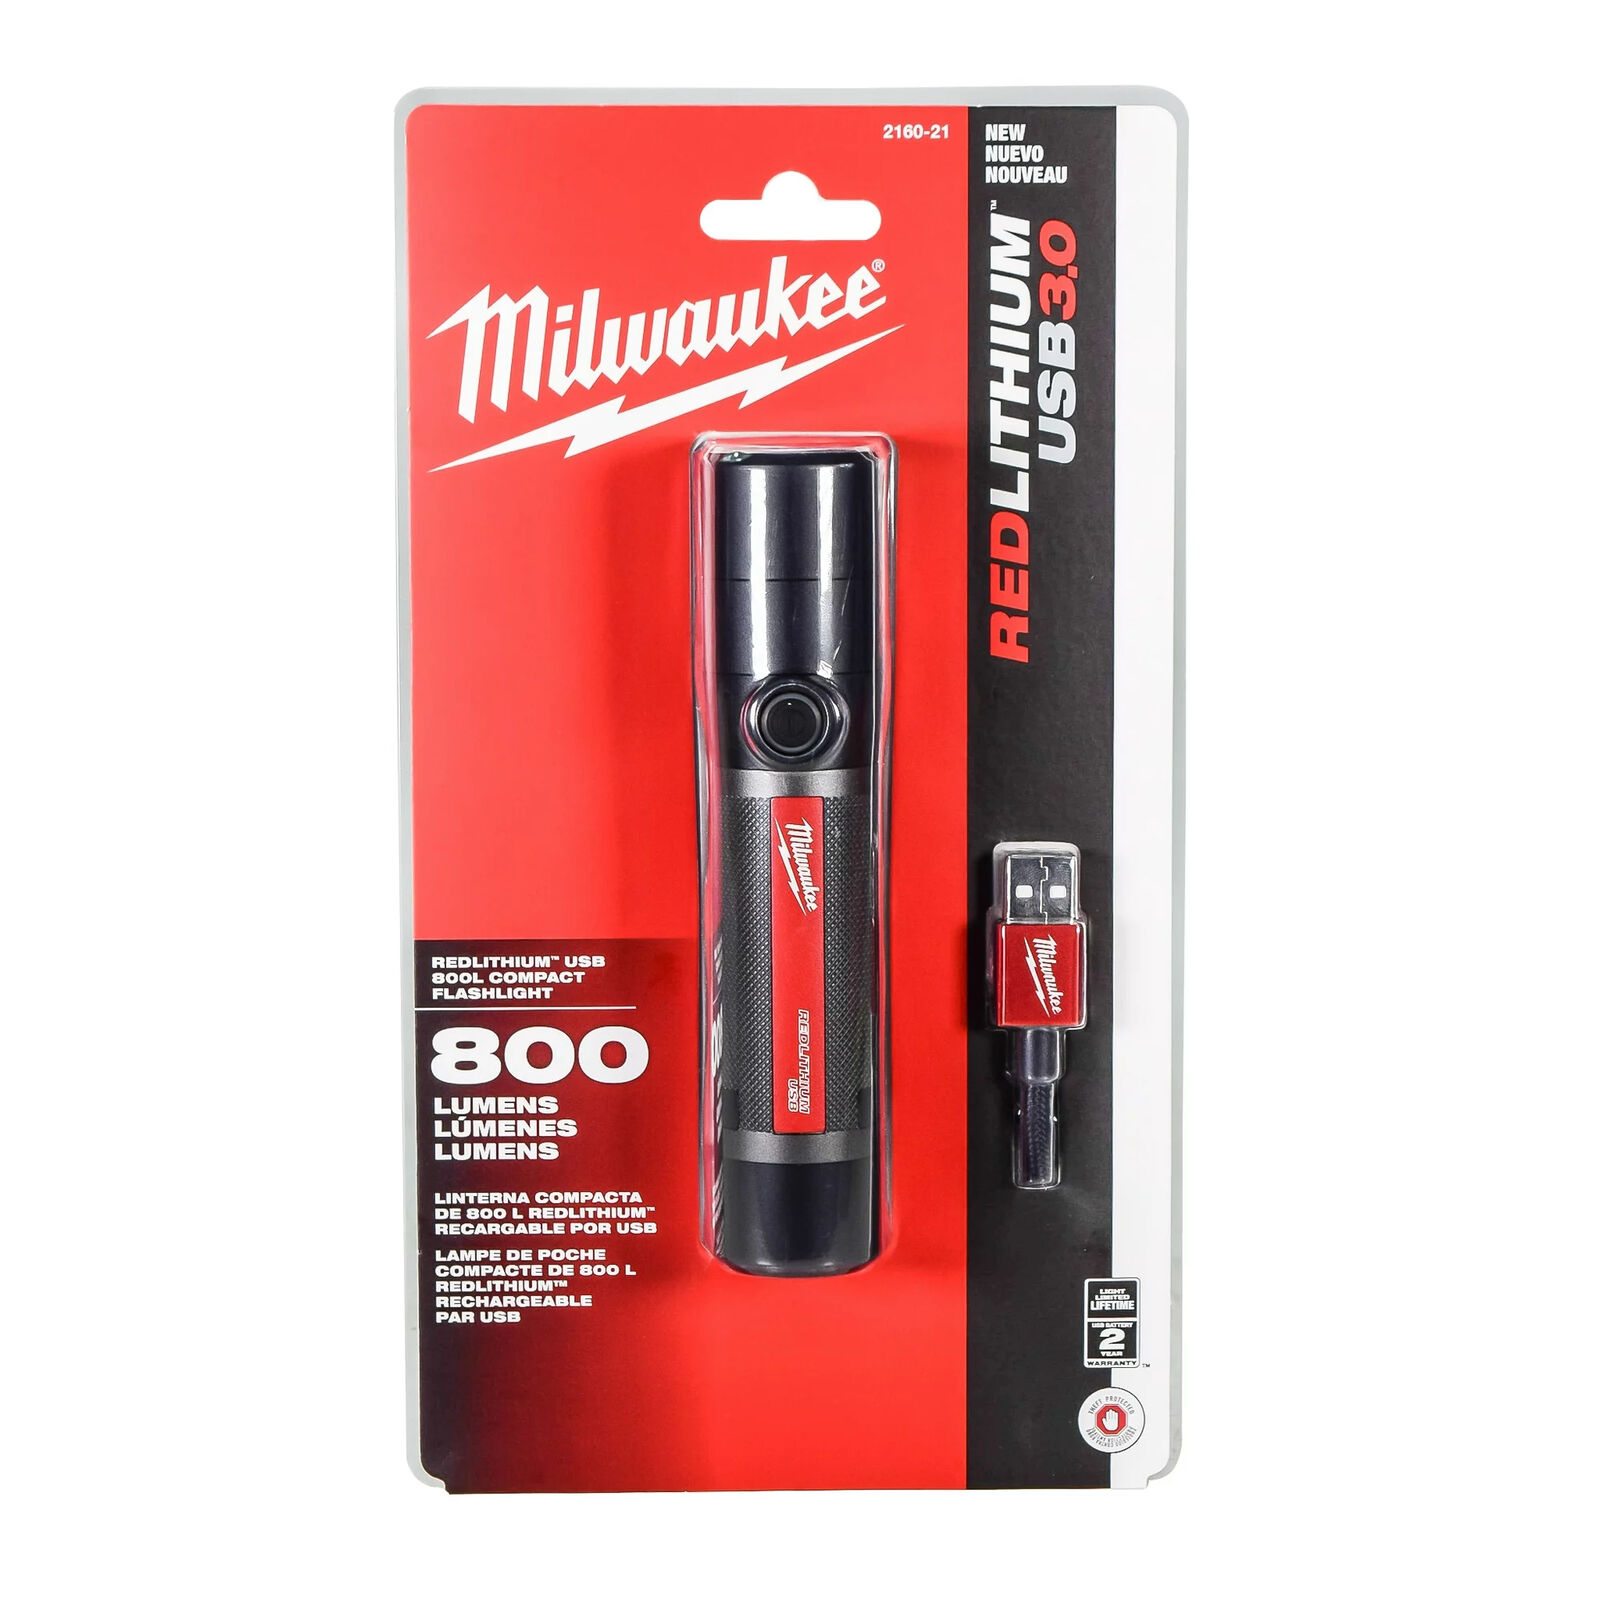 Milwaukee MLW2160-21 USB Rechargeable 800 Lumens Compact Cordless Flashlight